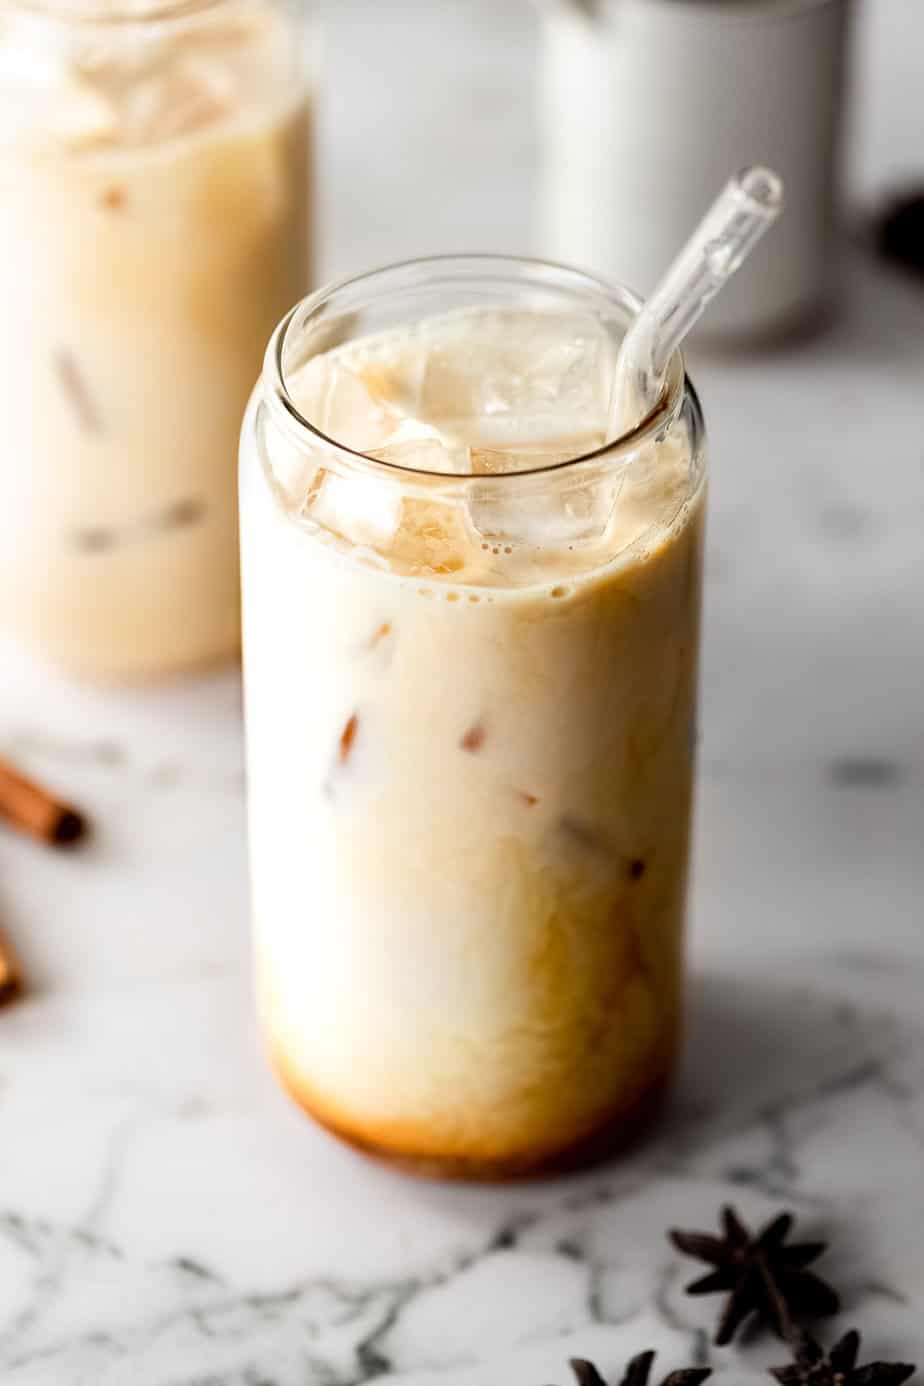 An Iced Dirty Chai Latte with ice cubes and whole dried spices.